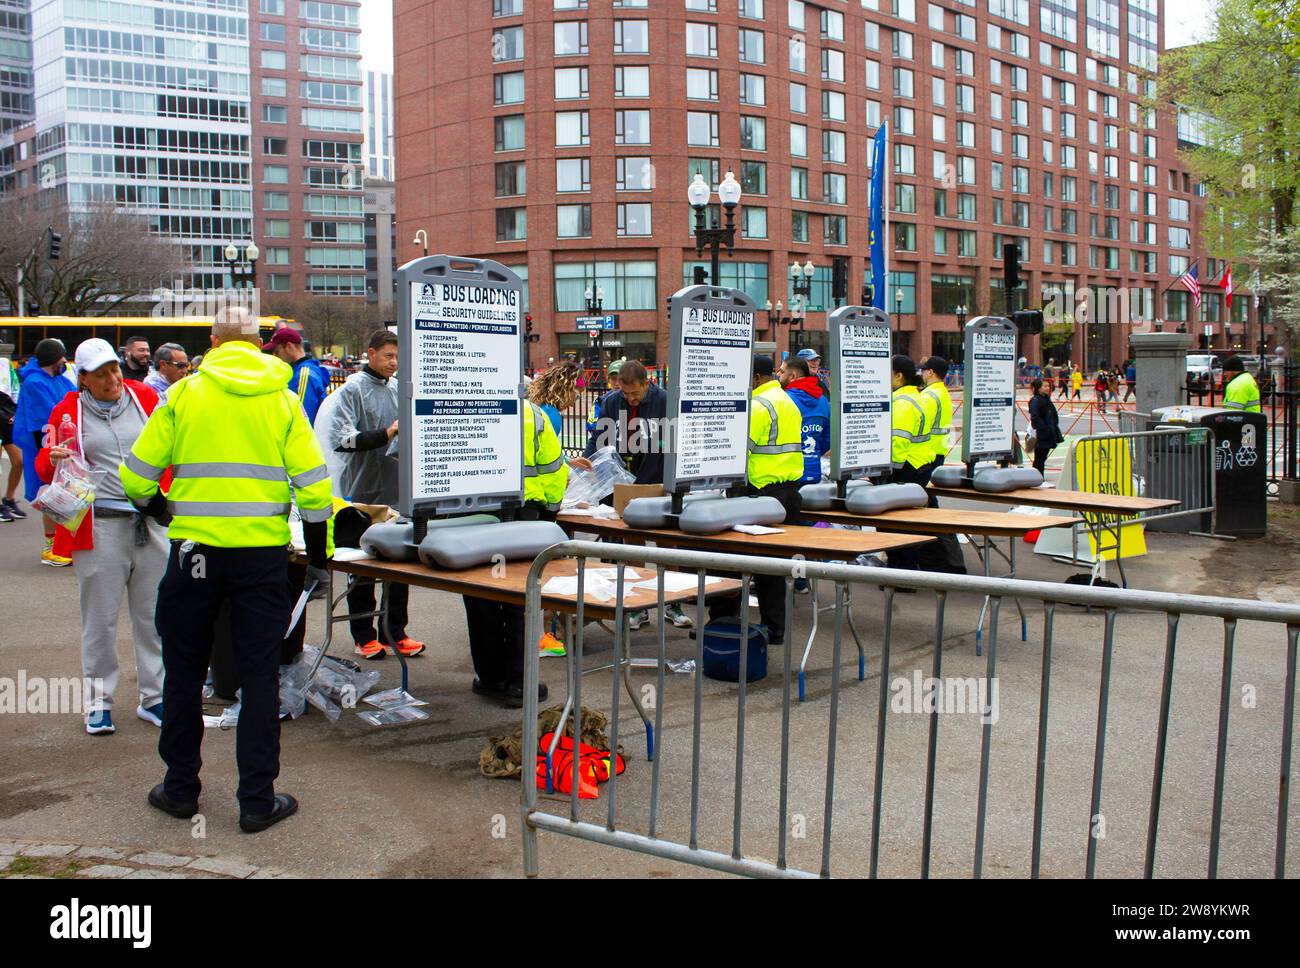 Boylston Street, Boston, MA, USA - April 17, 2023. Boston Common Park security checkpoint for Marathon runners before they enter bus boarding location Stock Photo